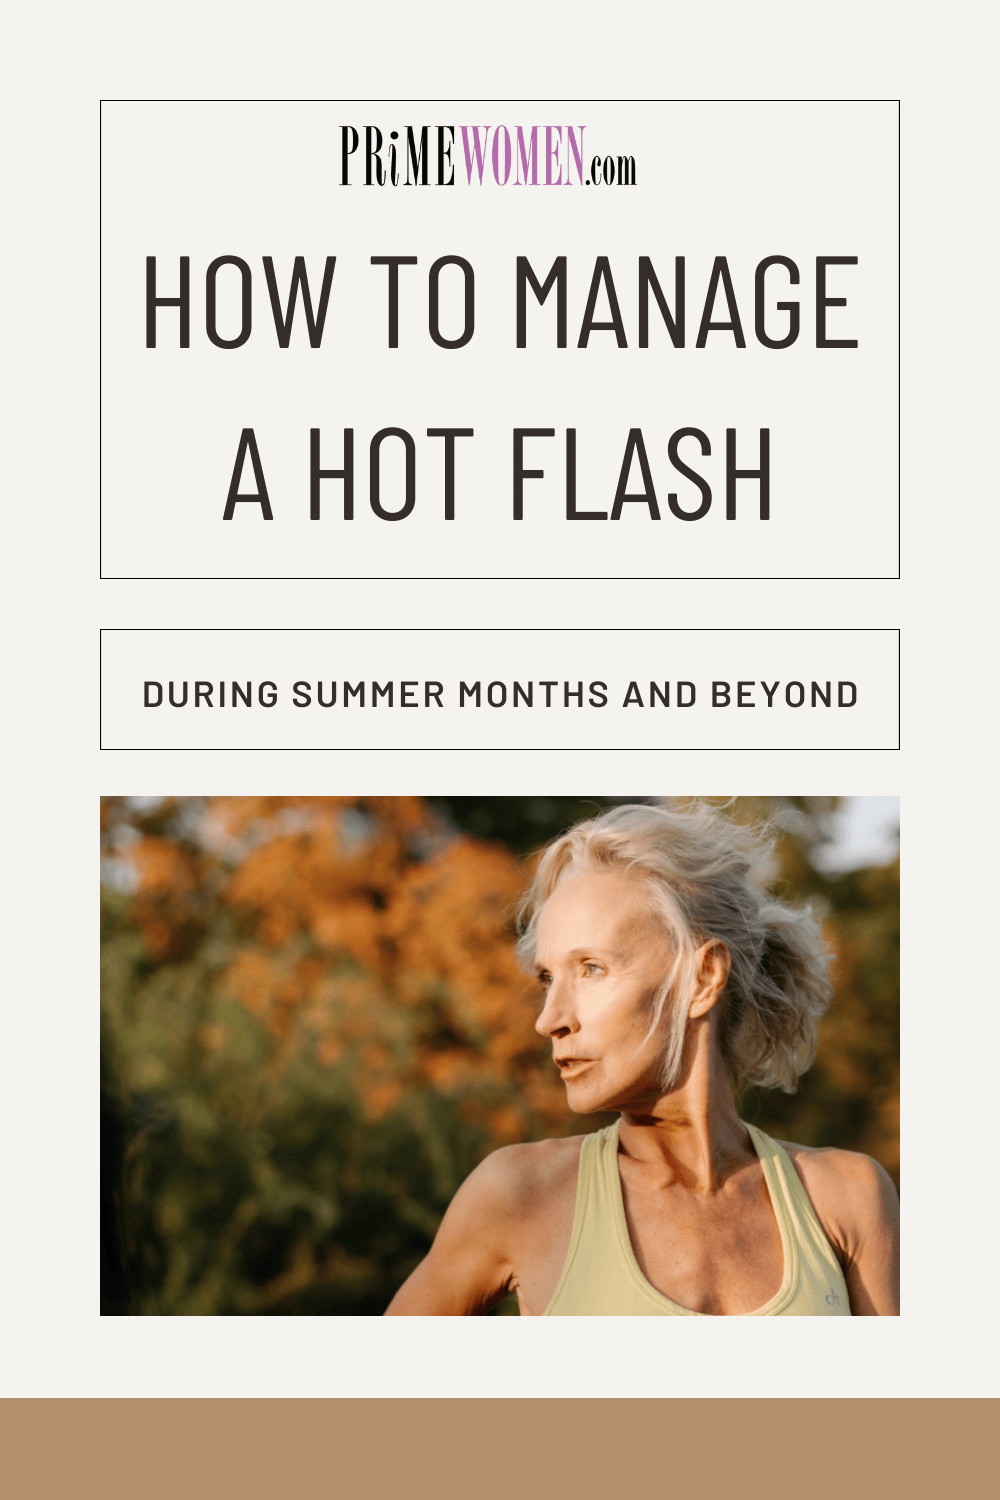 How to manage a hot flash